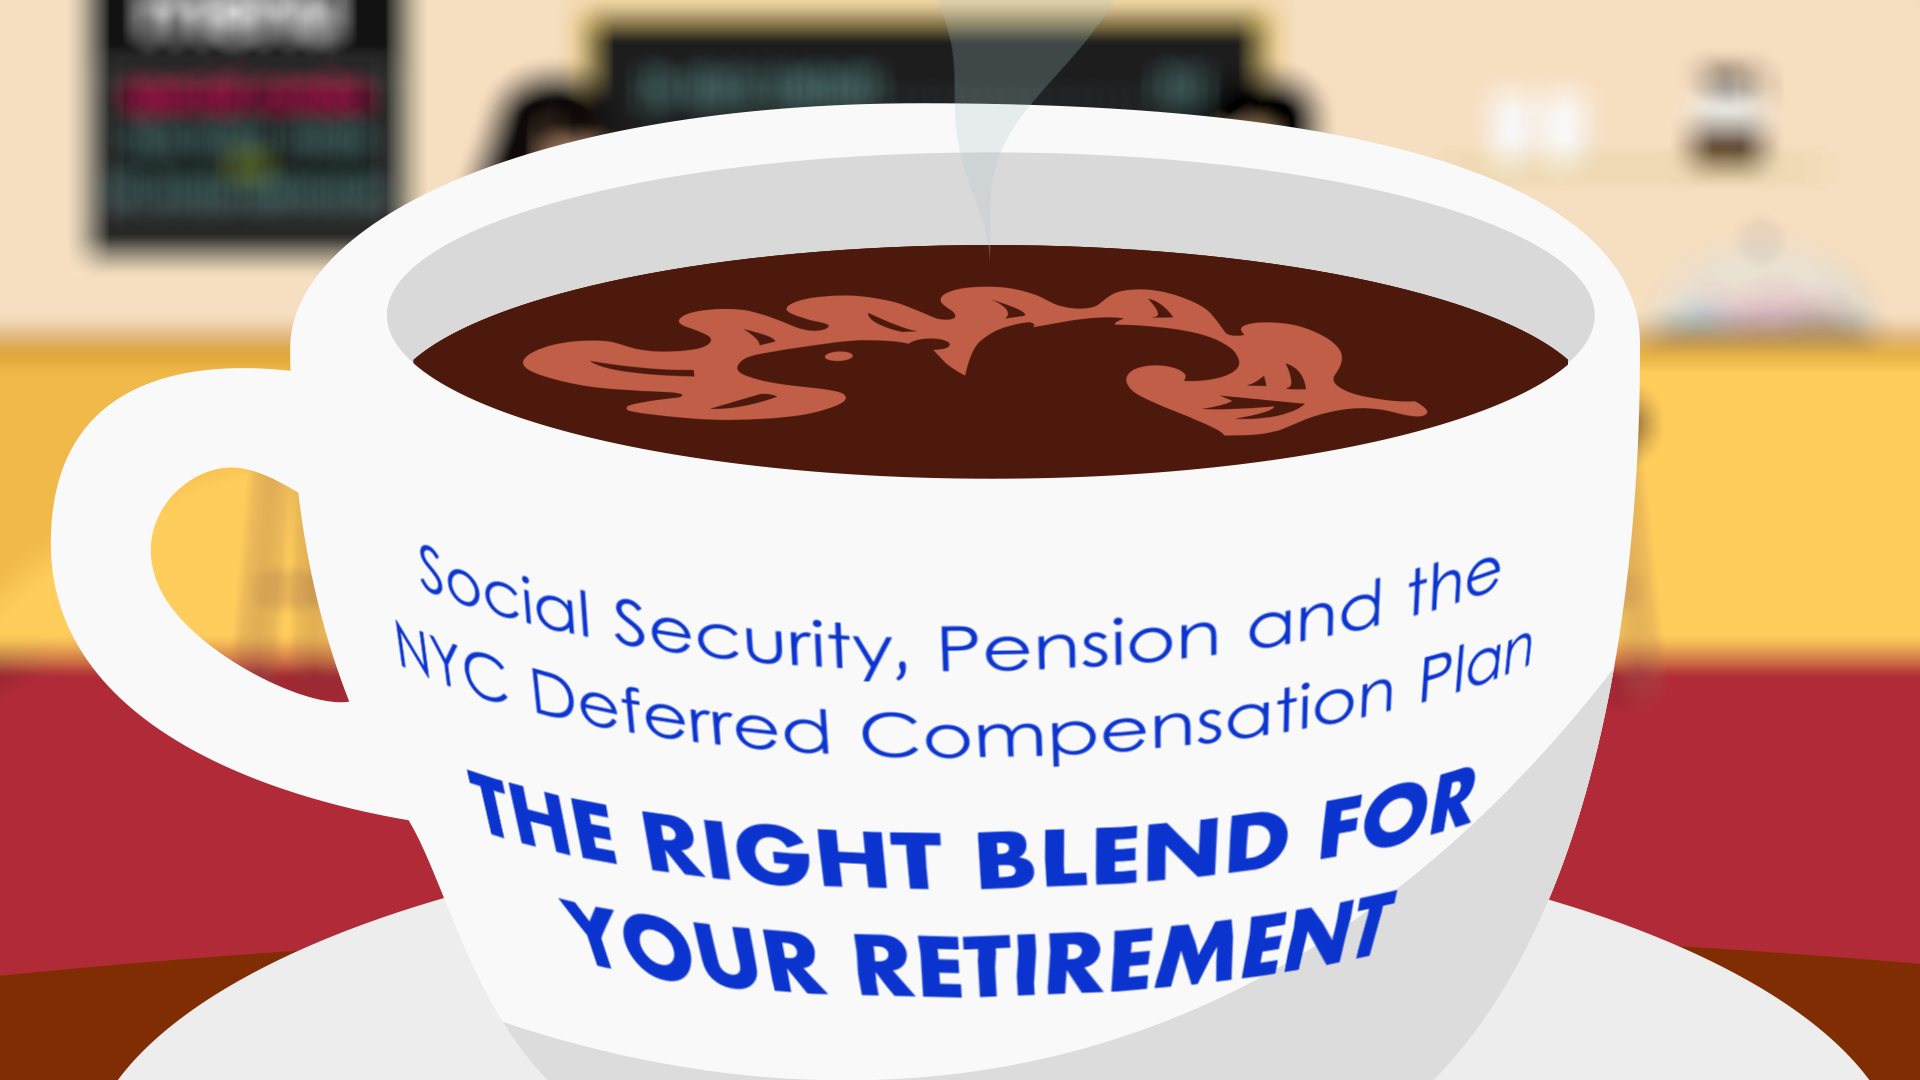 The Right Blend for Your Retirement